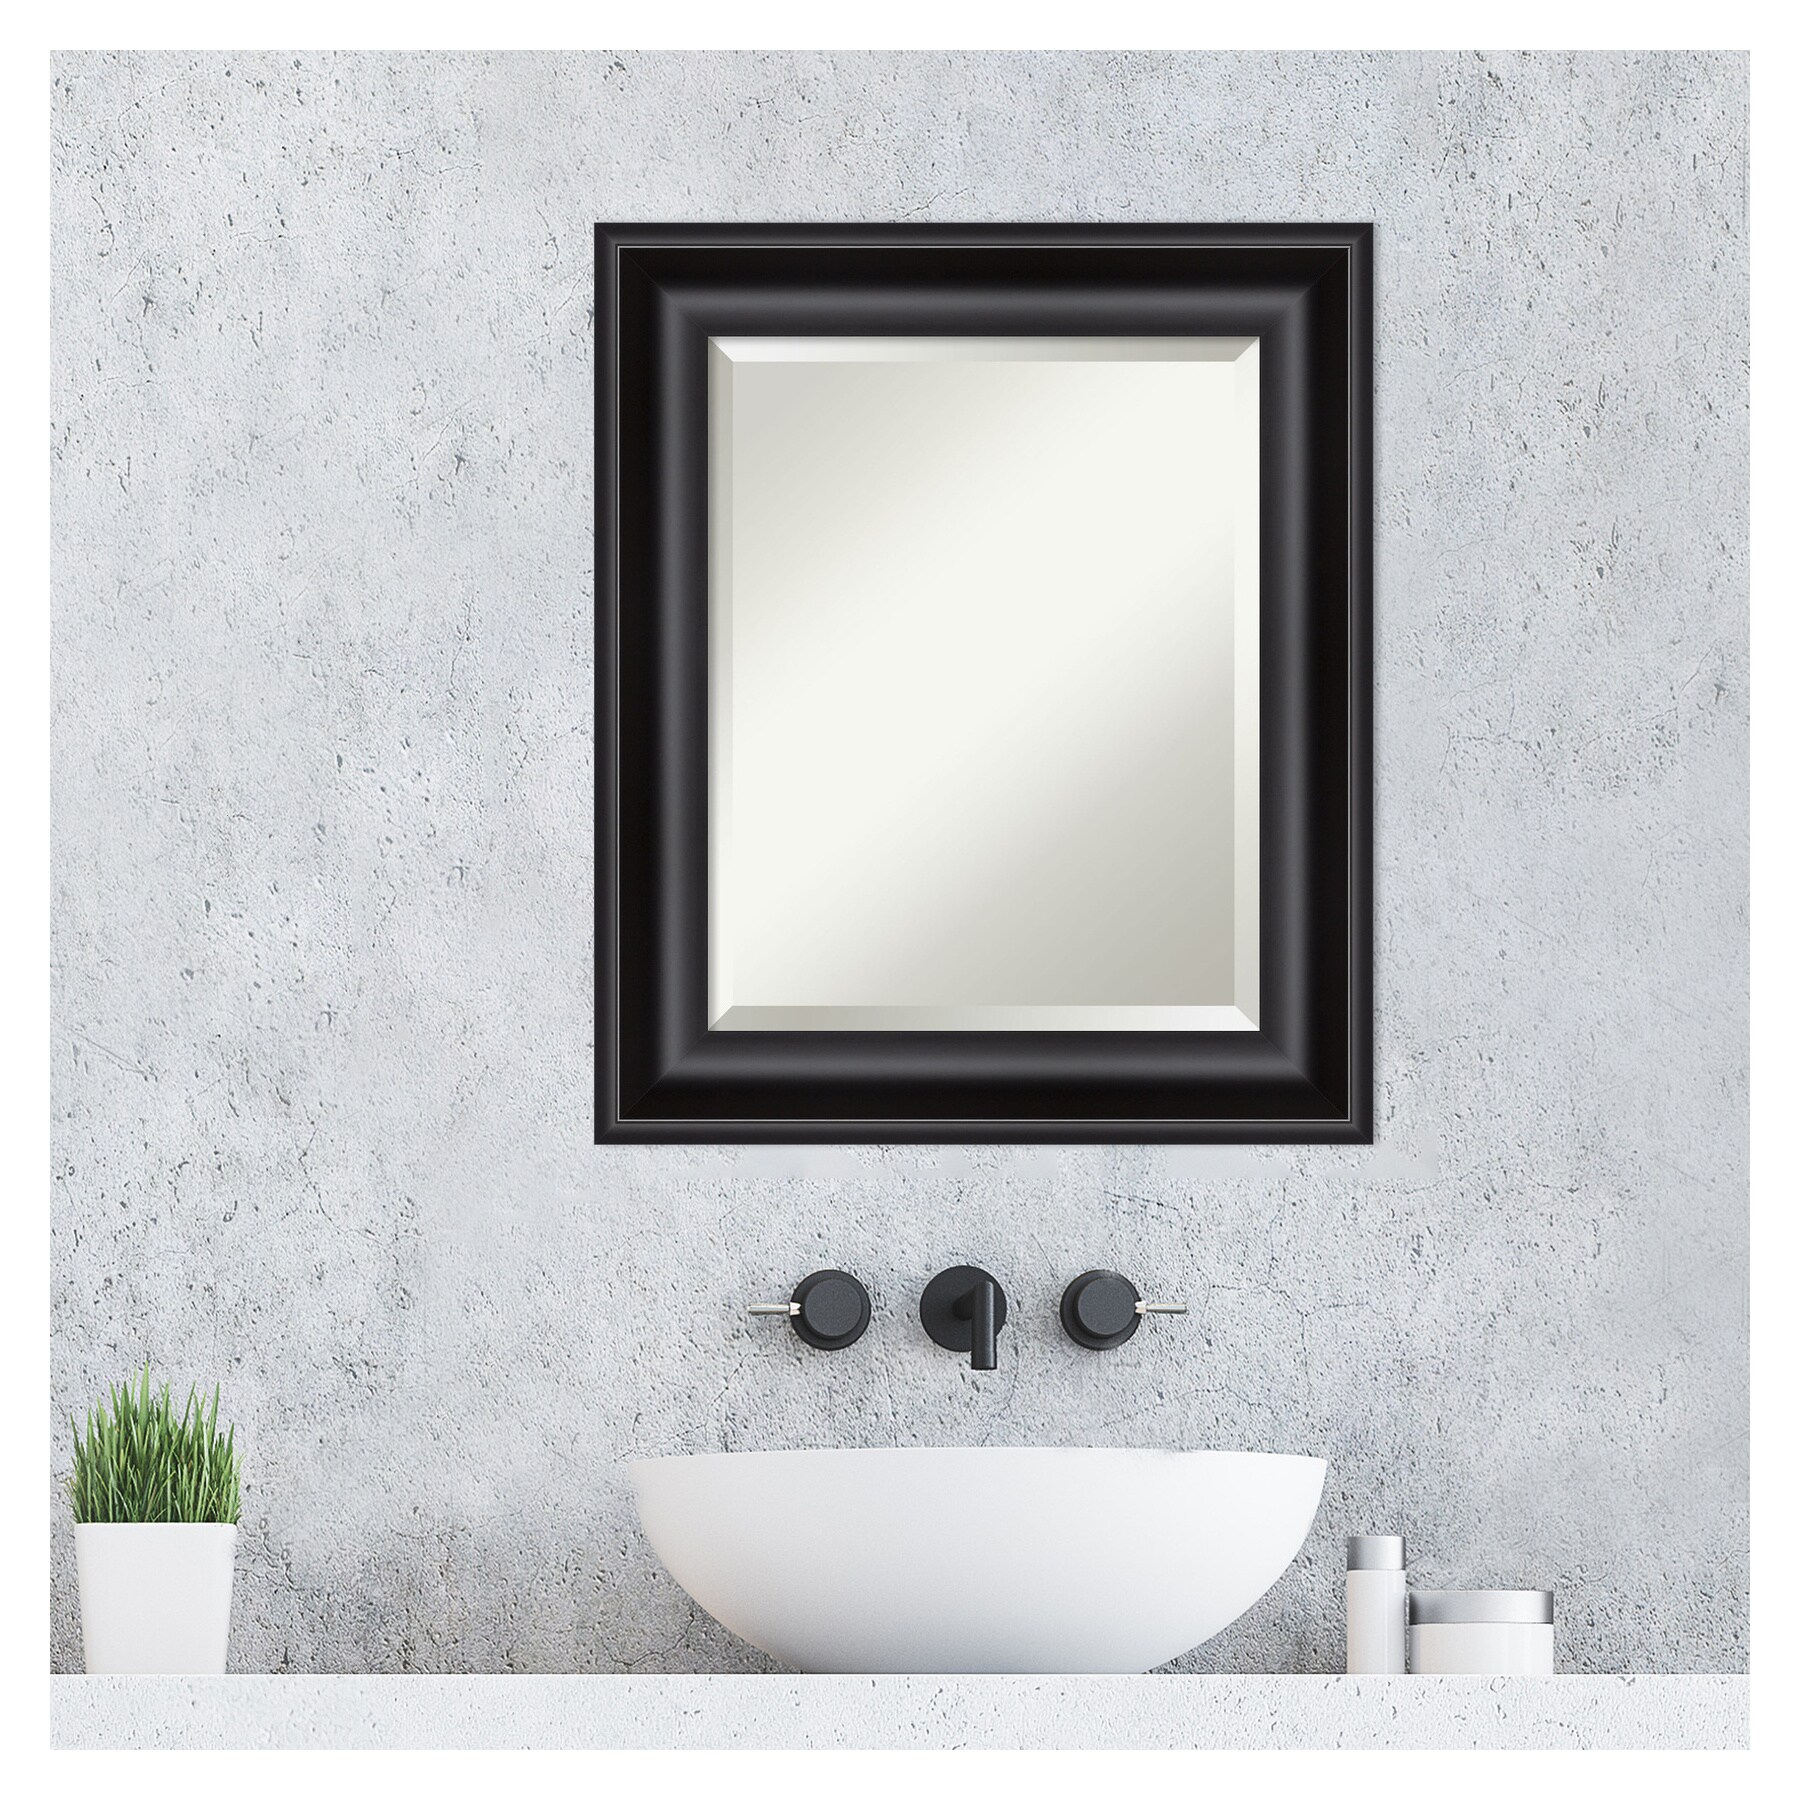 Amanti Art Grand Black Frame Collection 21.75-in x 25.75-in Bathroom ...